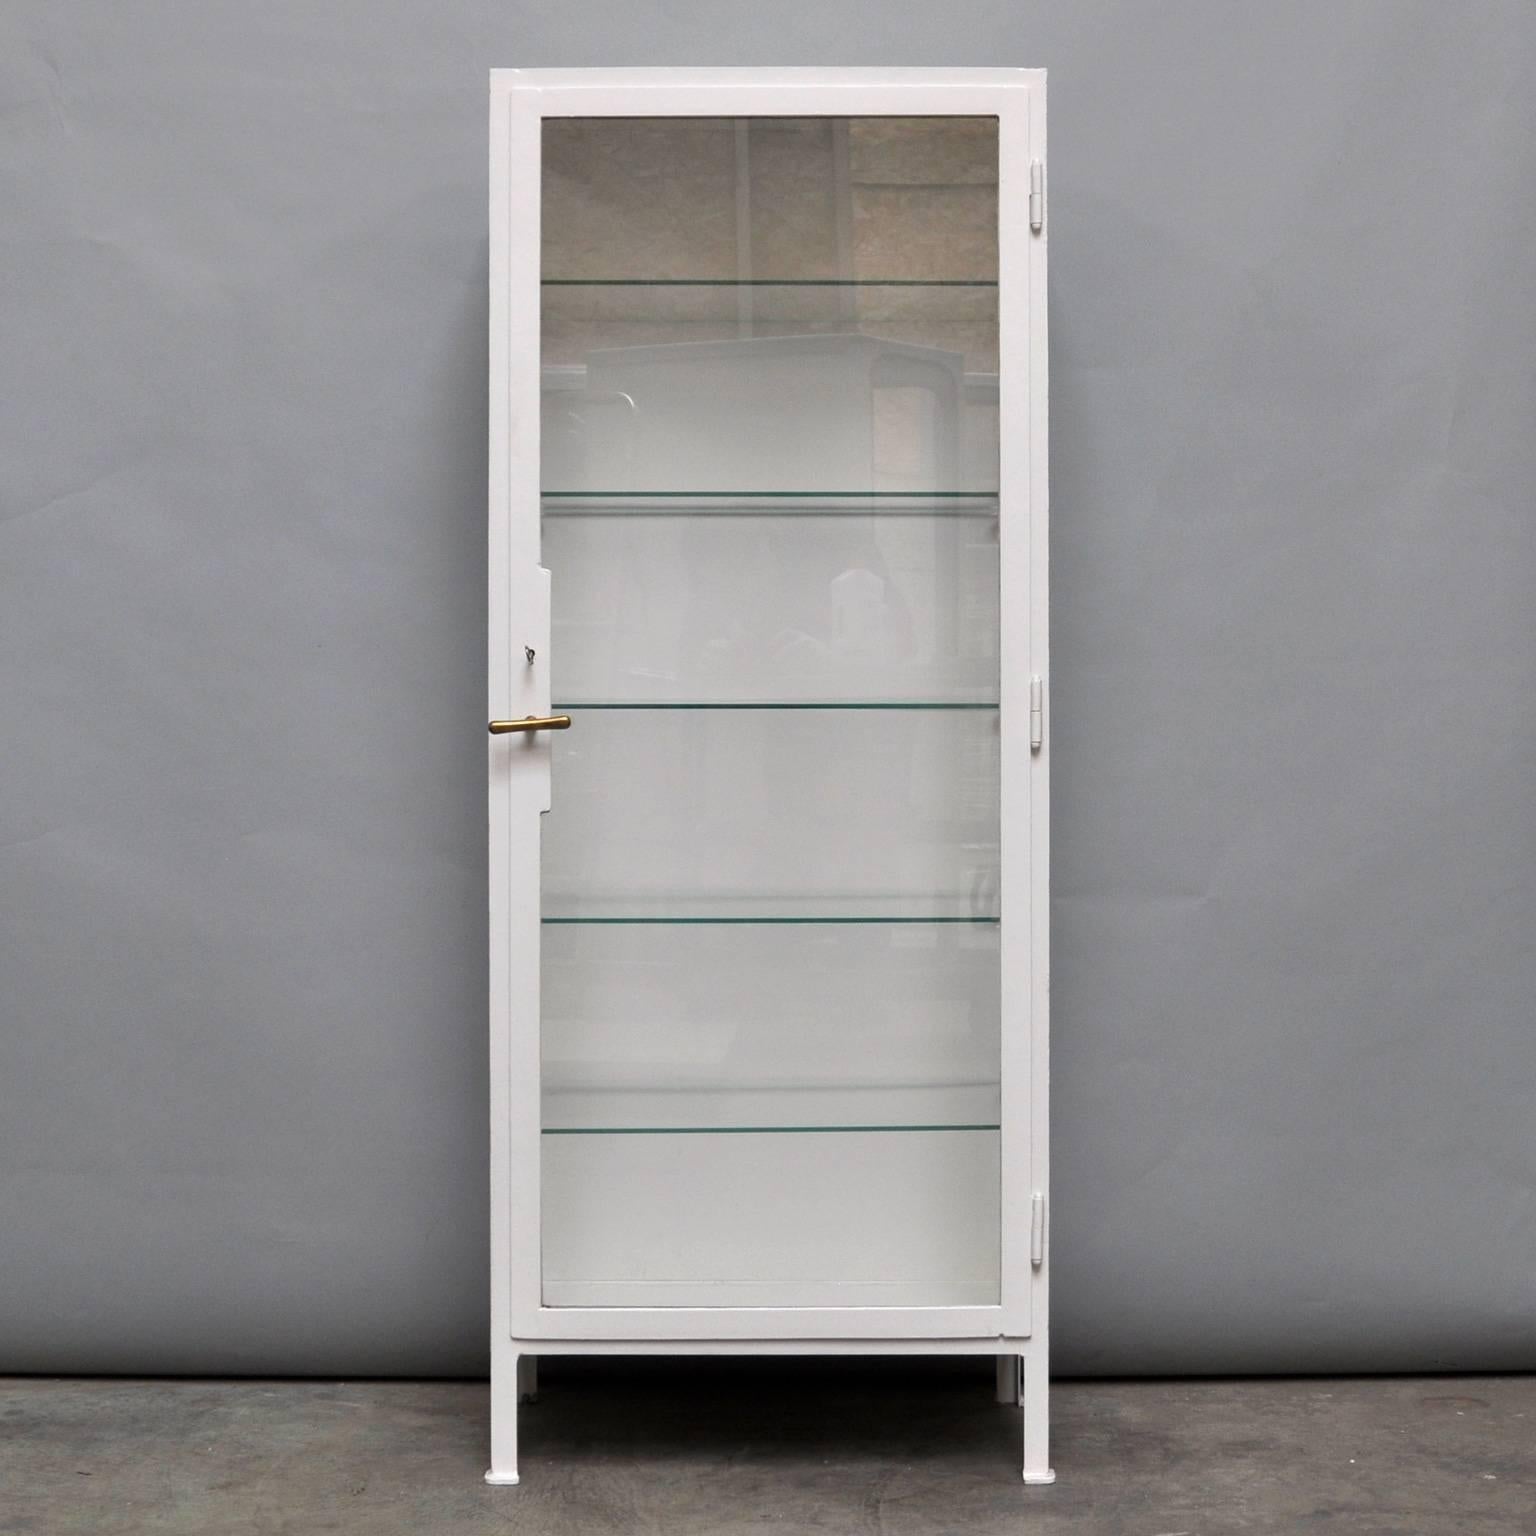 This medicine cabinet was produced circa 1945 in Hungary. The cabinet is made from thick iron and glass, and features five glass shelves. In an excellent condition, the piece has been restored.